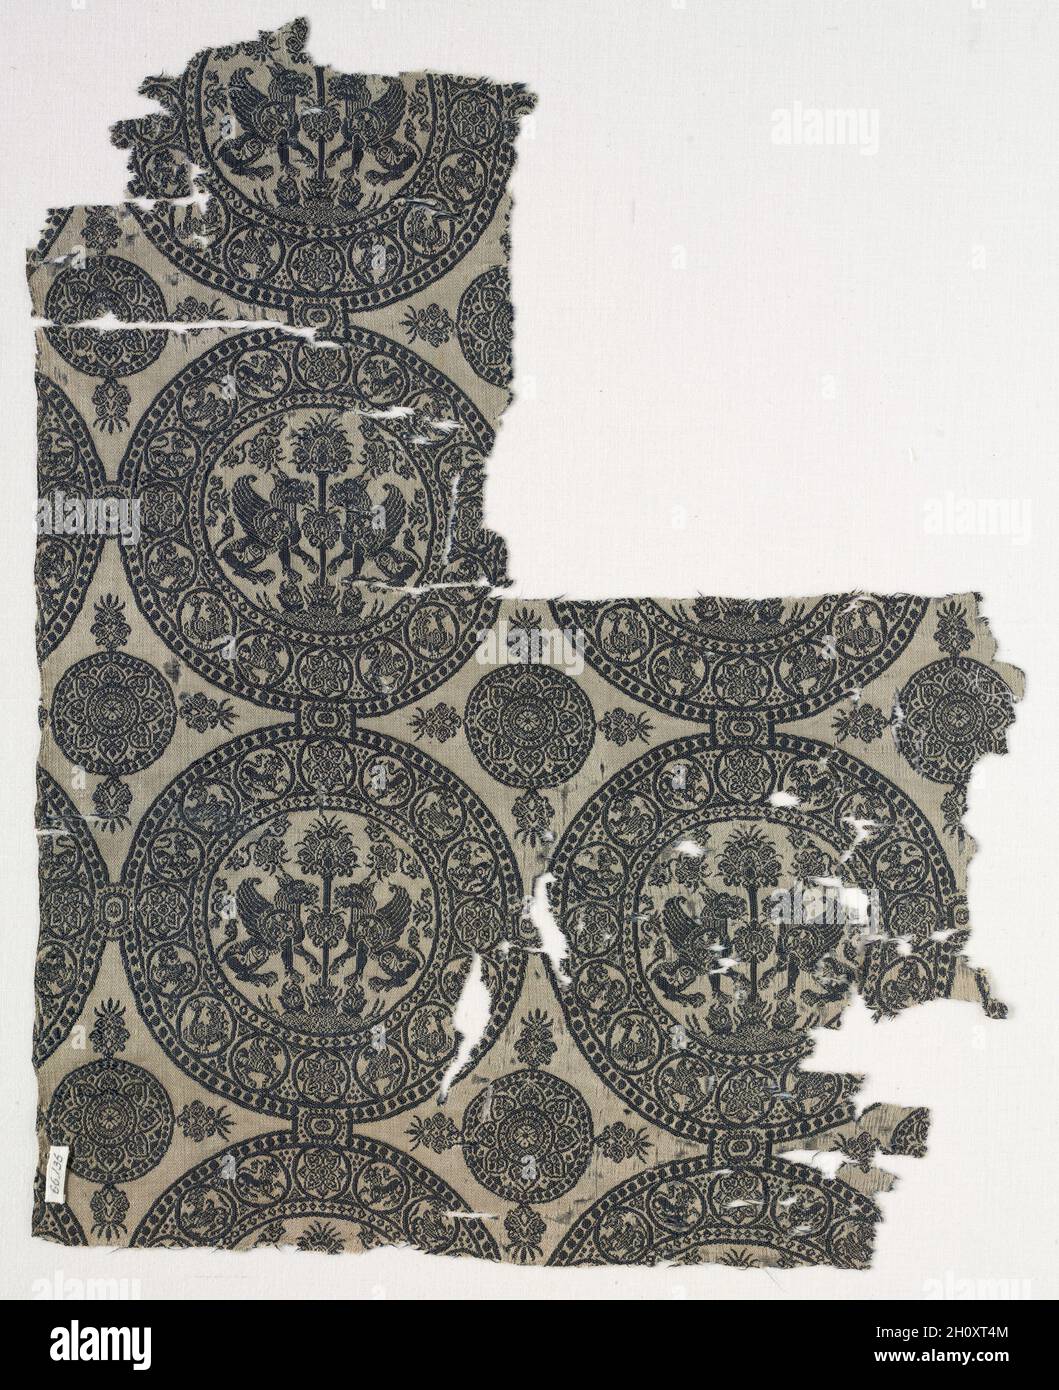 Fragments with Griffins in Roundels, before 1966. Iran or Iraq, in the style of the Seljuq period (1037–1194). Lampas weave, silk; average: 41 x 32.8 cm (16 1/8 x 12 15/16 in.).  This fragment consists of two almost complete roundels in lower right and fragment of third one at the left, plus parts of other roundels. In the roundels are a pair of confronted, winged griffins either side of a 'palm' tree. Heavy baroque floral motifs fill the spaces between the main motifs and the roundel frame. The palm grows out of a curious foliate device at the bottom. The roundel frame has pearl borders betwe Stock Photo